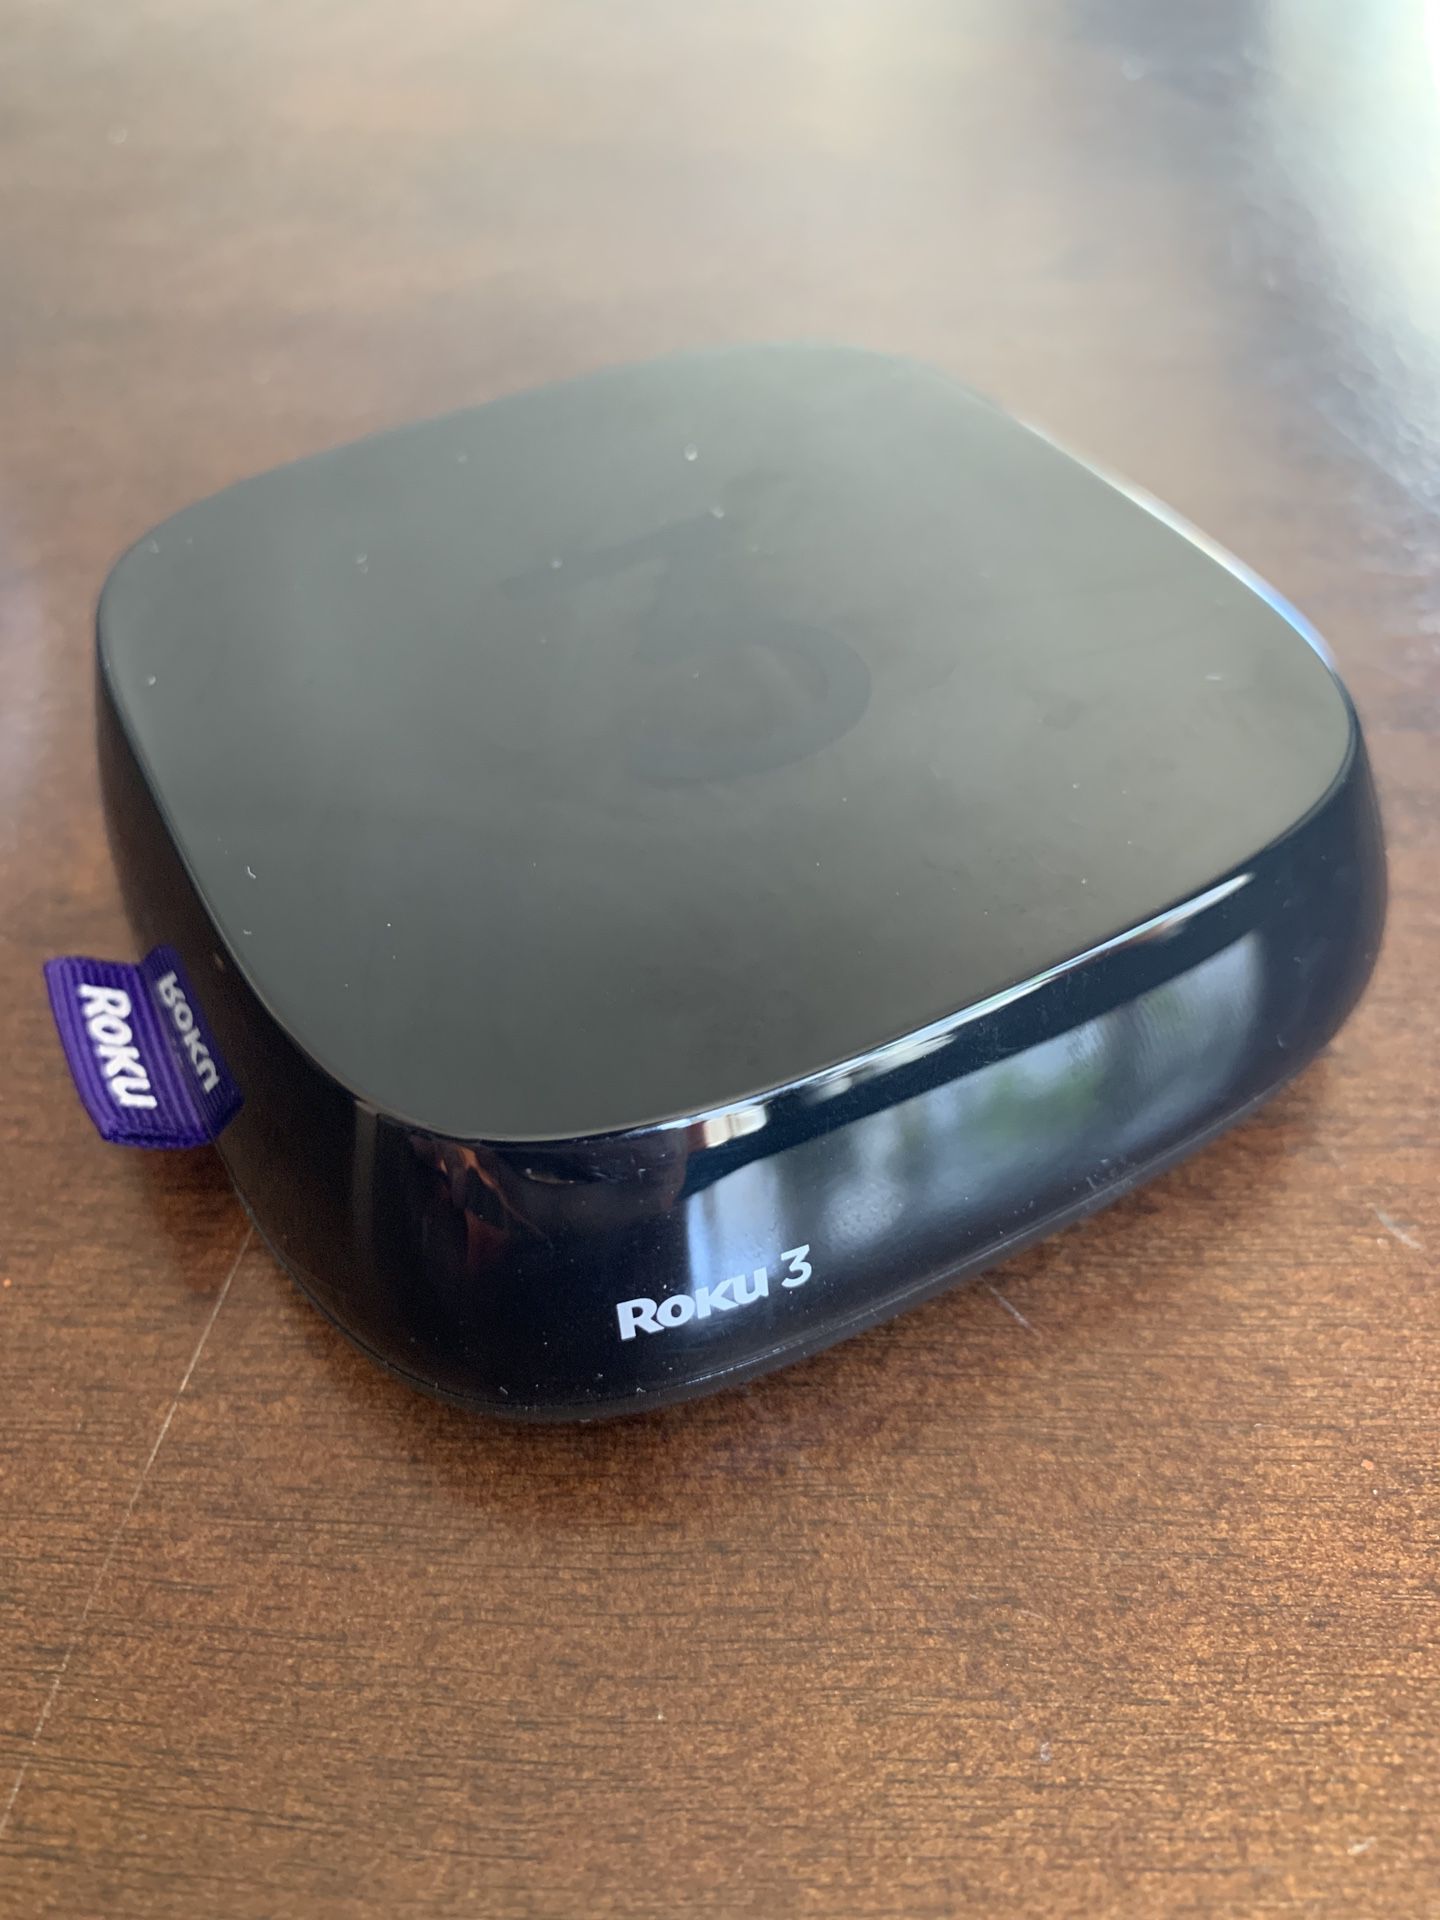 Roku 3 (4230X1 model) Streaming Device with Voice and Headphone Plug Remote